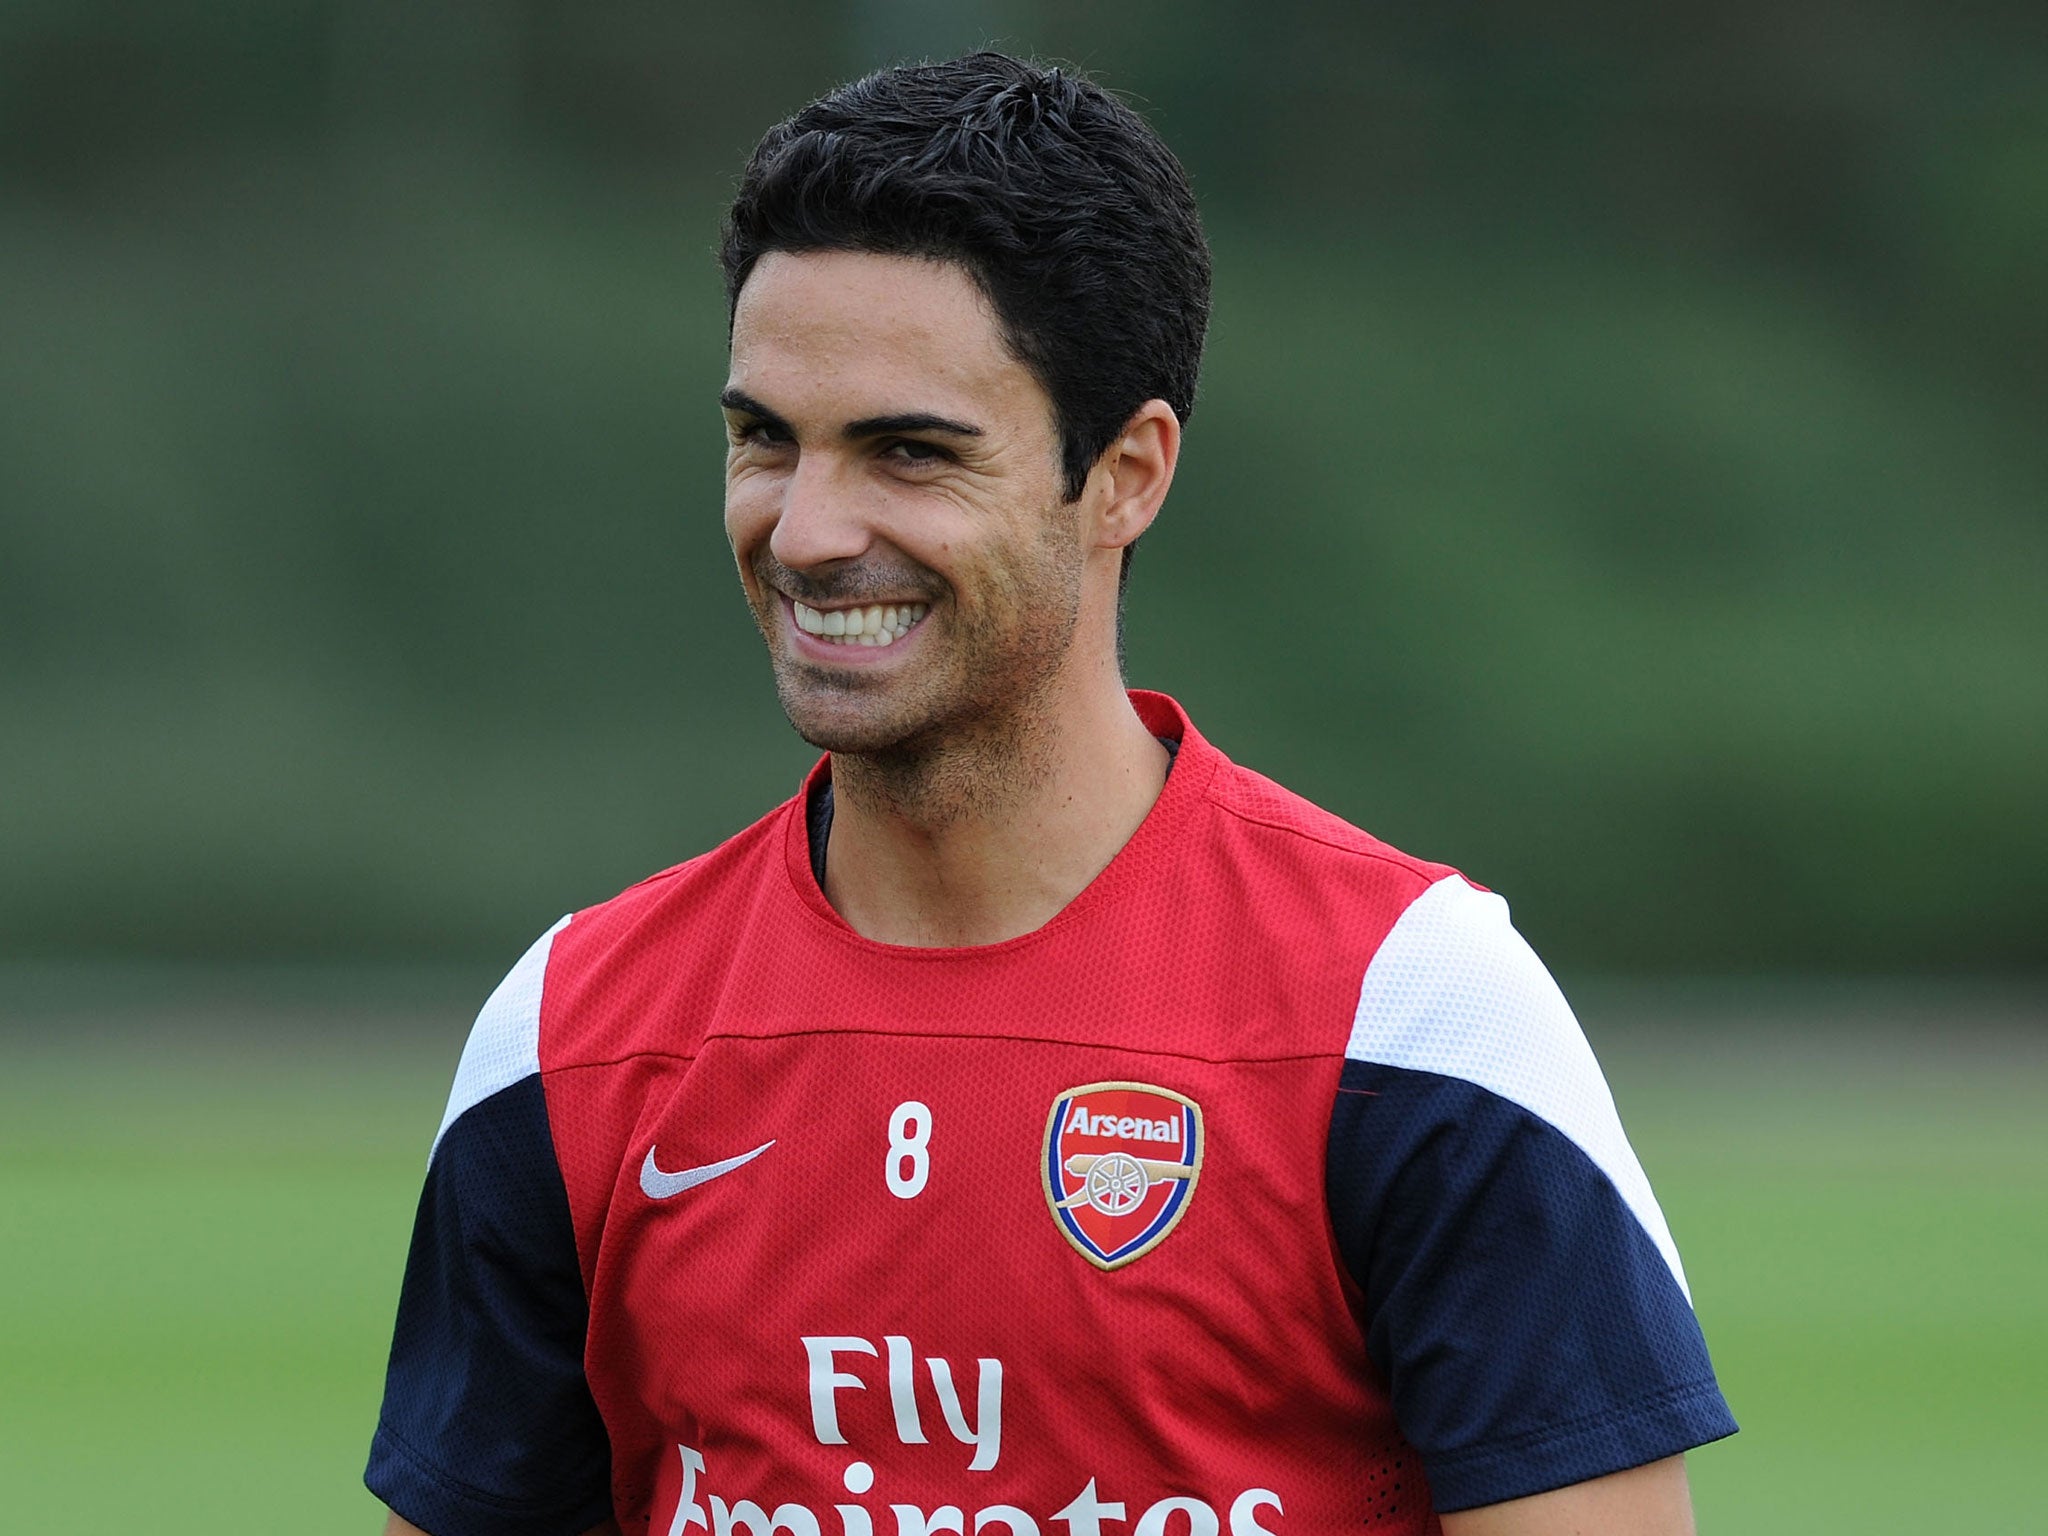 Mikel Arteta could make his first appearance of the season for Arsenal against Stoke